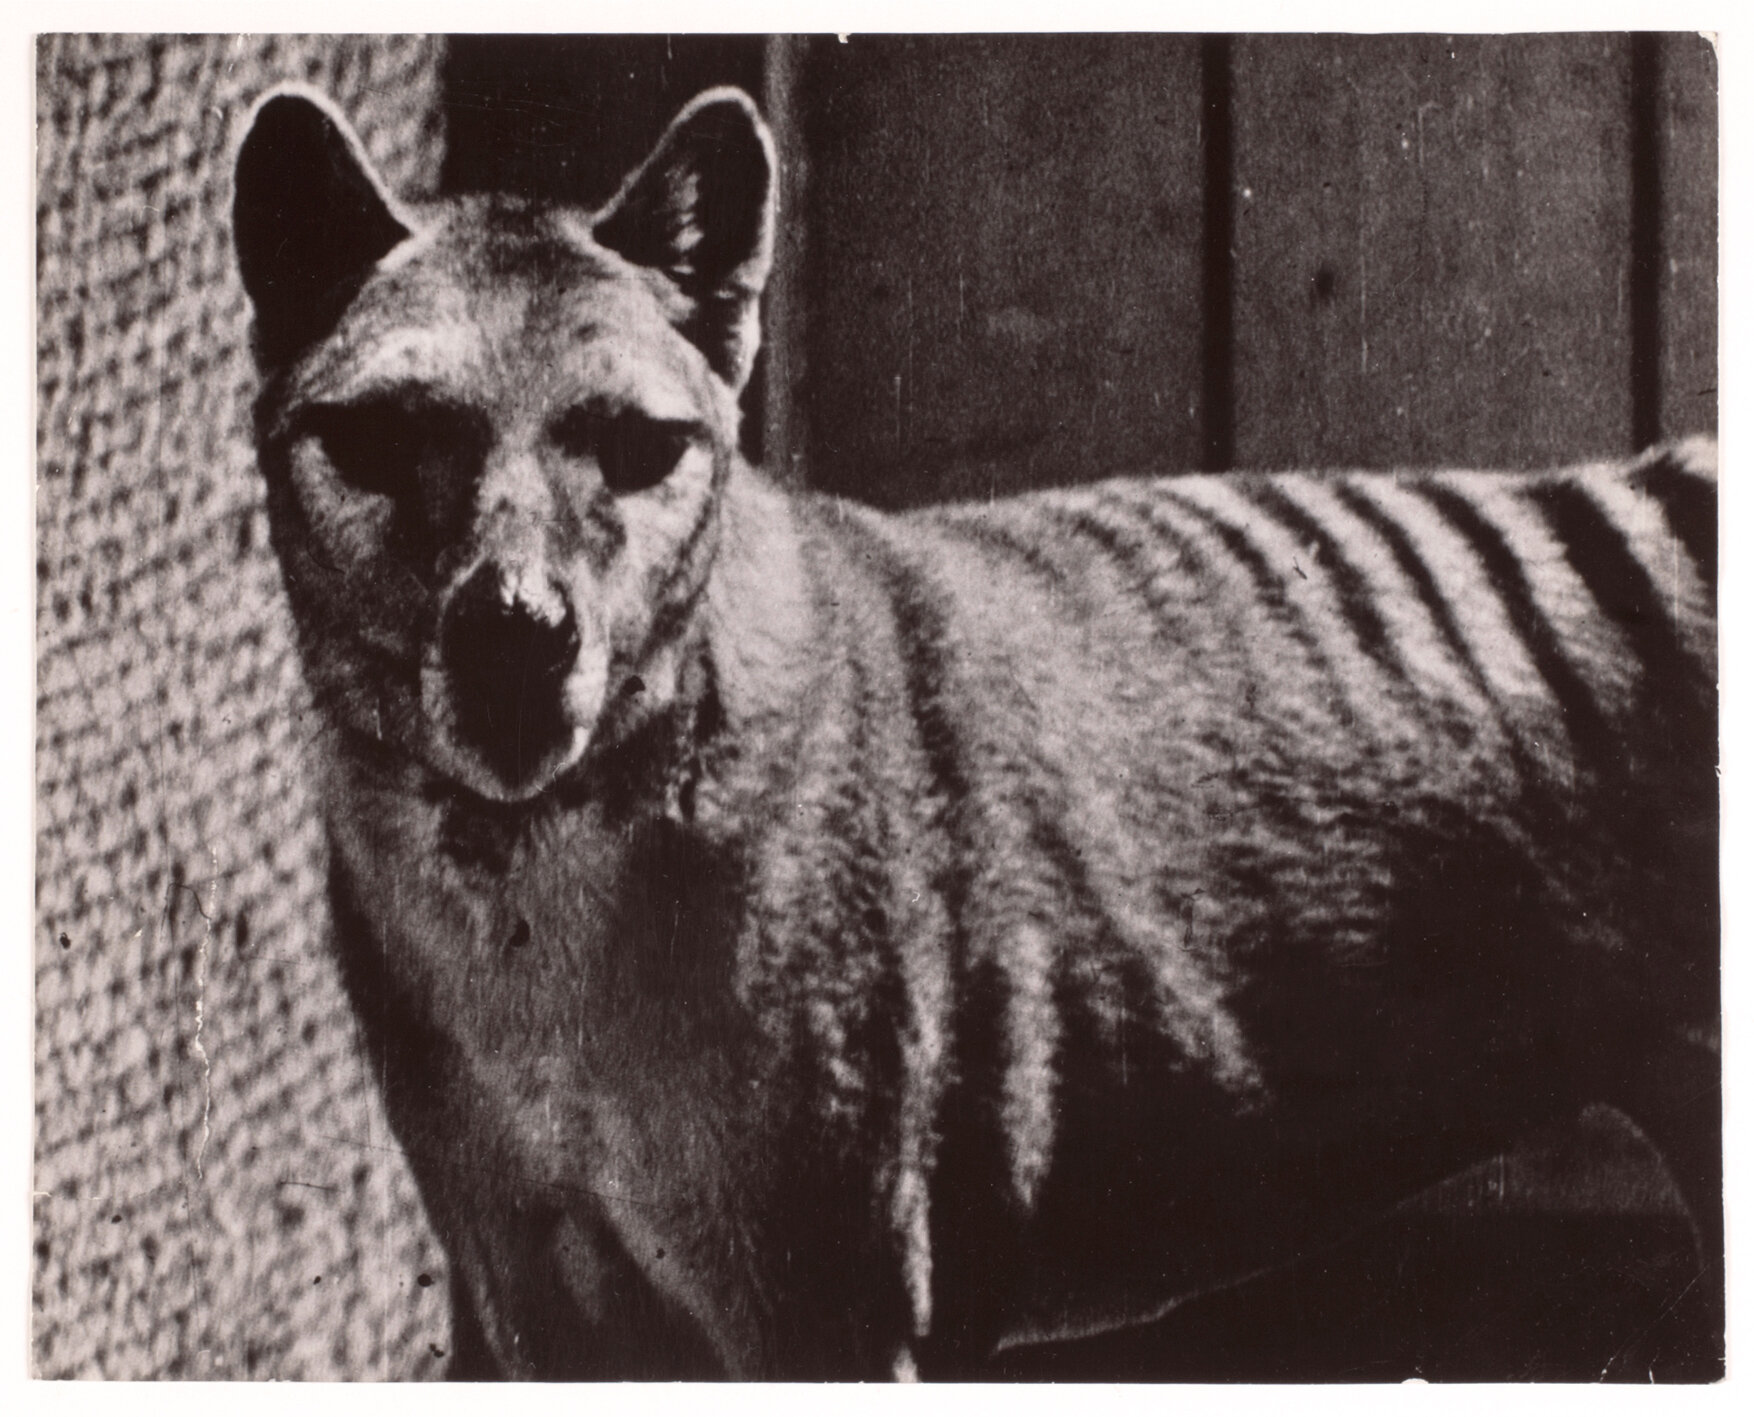 Tasmanian Tiger (Thylacine). Photograph AA193/1/1003 from the Archives Office of Tasmania,  is reproduced here, courtesy of the Libraries Tasmania Online Collection.